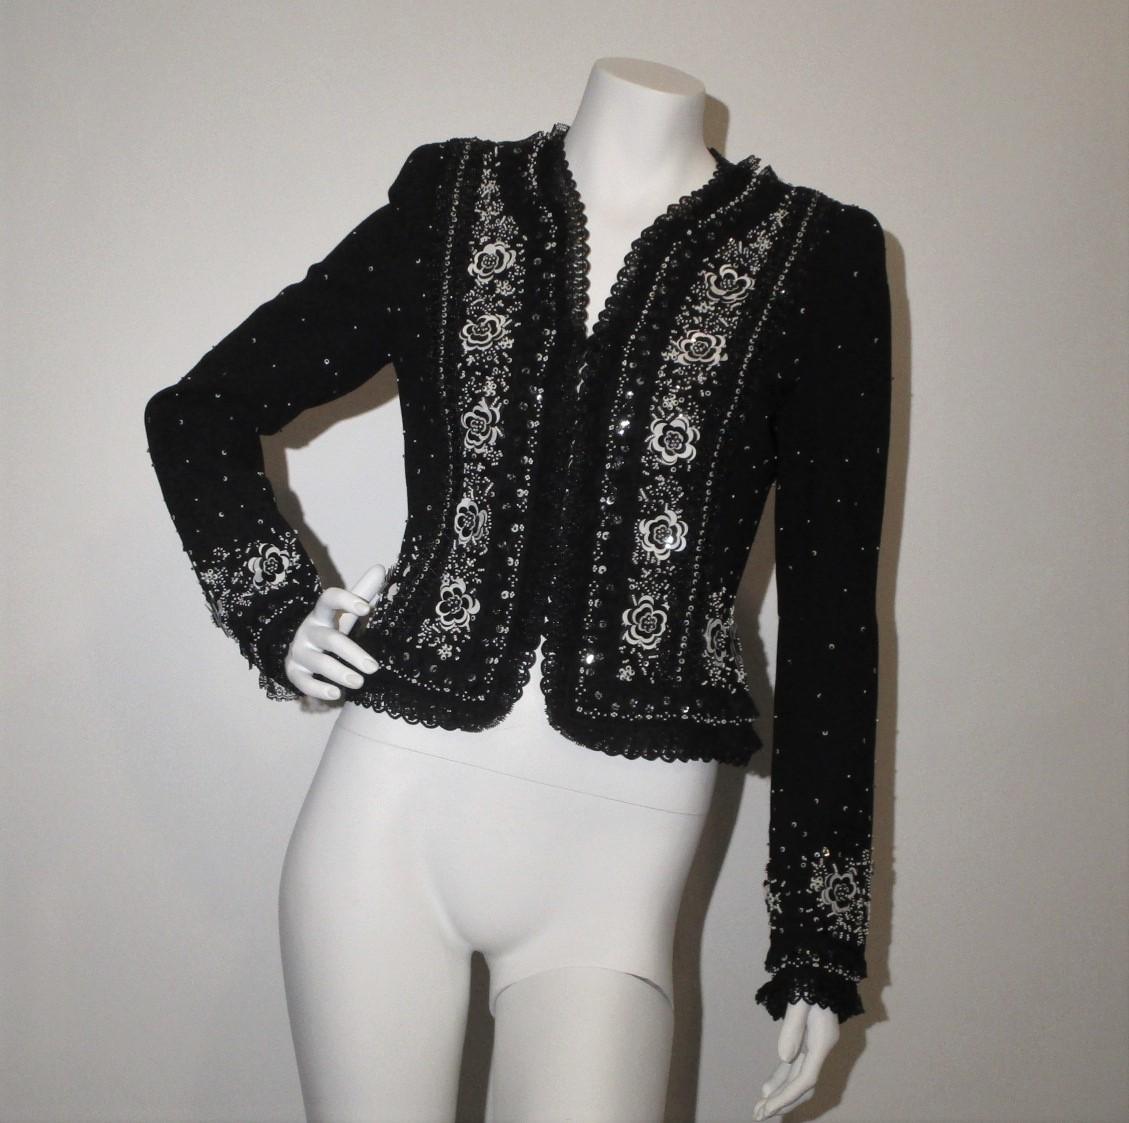 Stunning ESCADA Couture Black Jacket which has gorgeous beading, sequin and lace.

Measurements:
Size 36
20